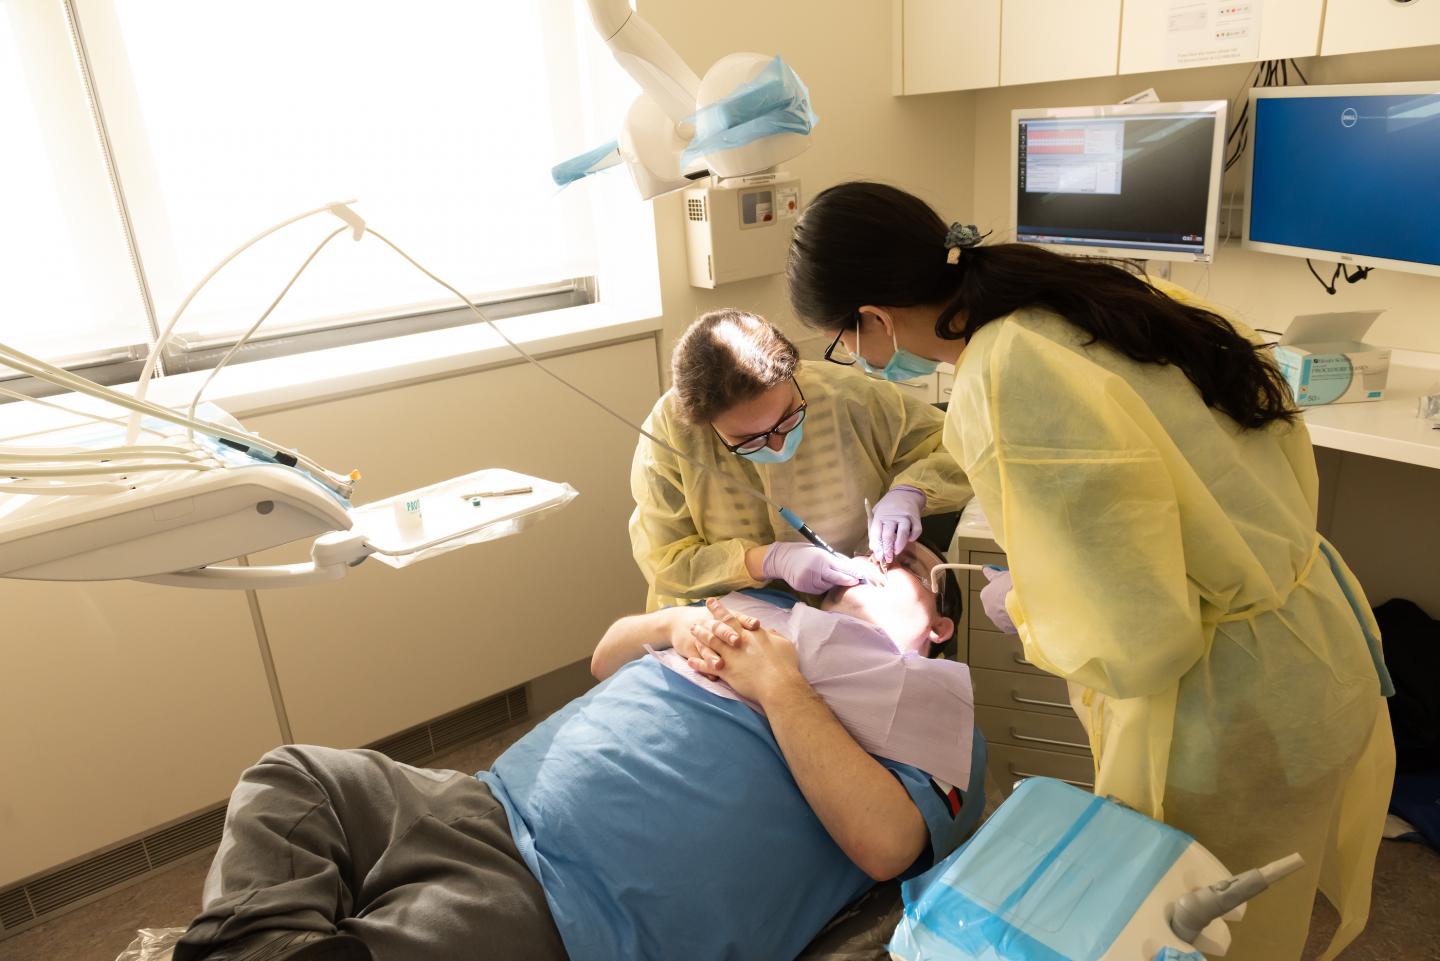 NYU Dentistry Oral Health Center for People with Disabilities